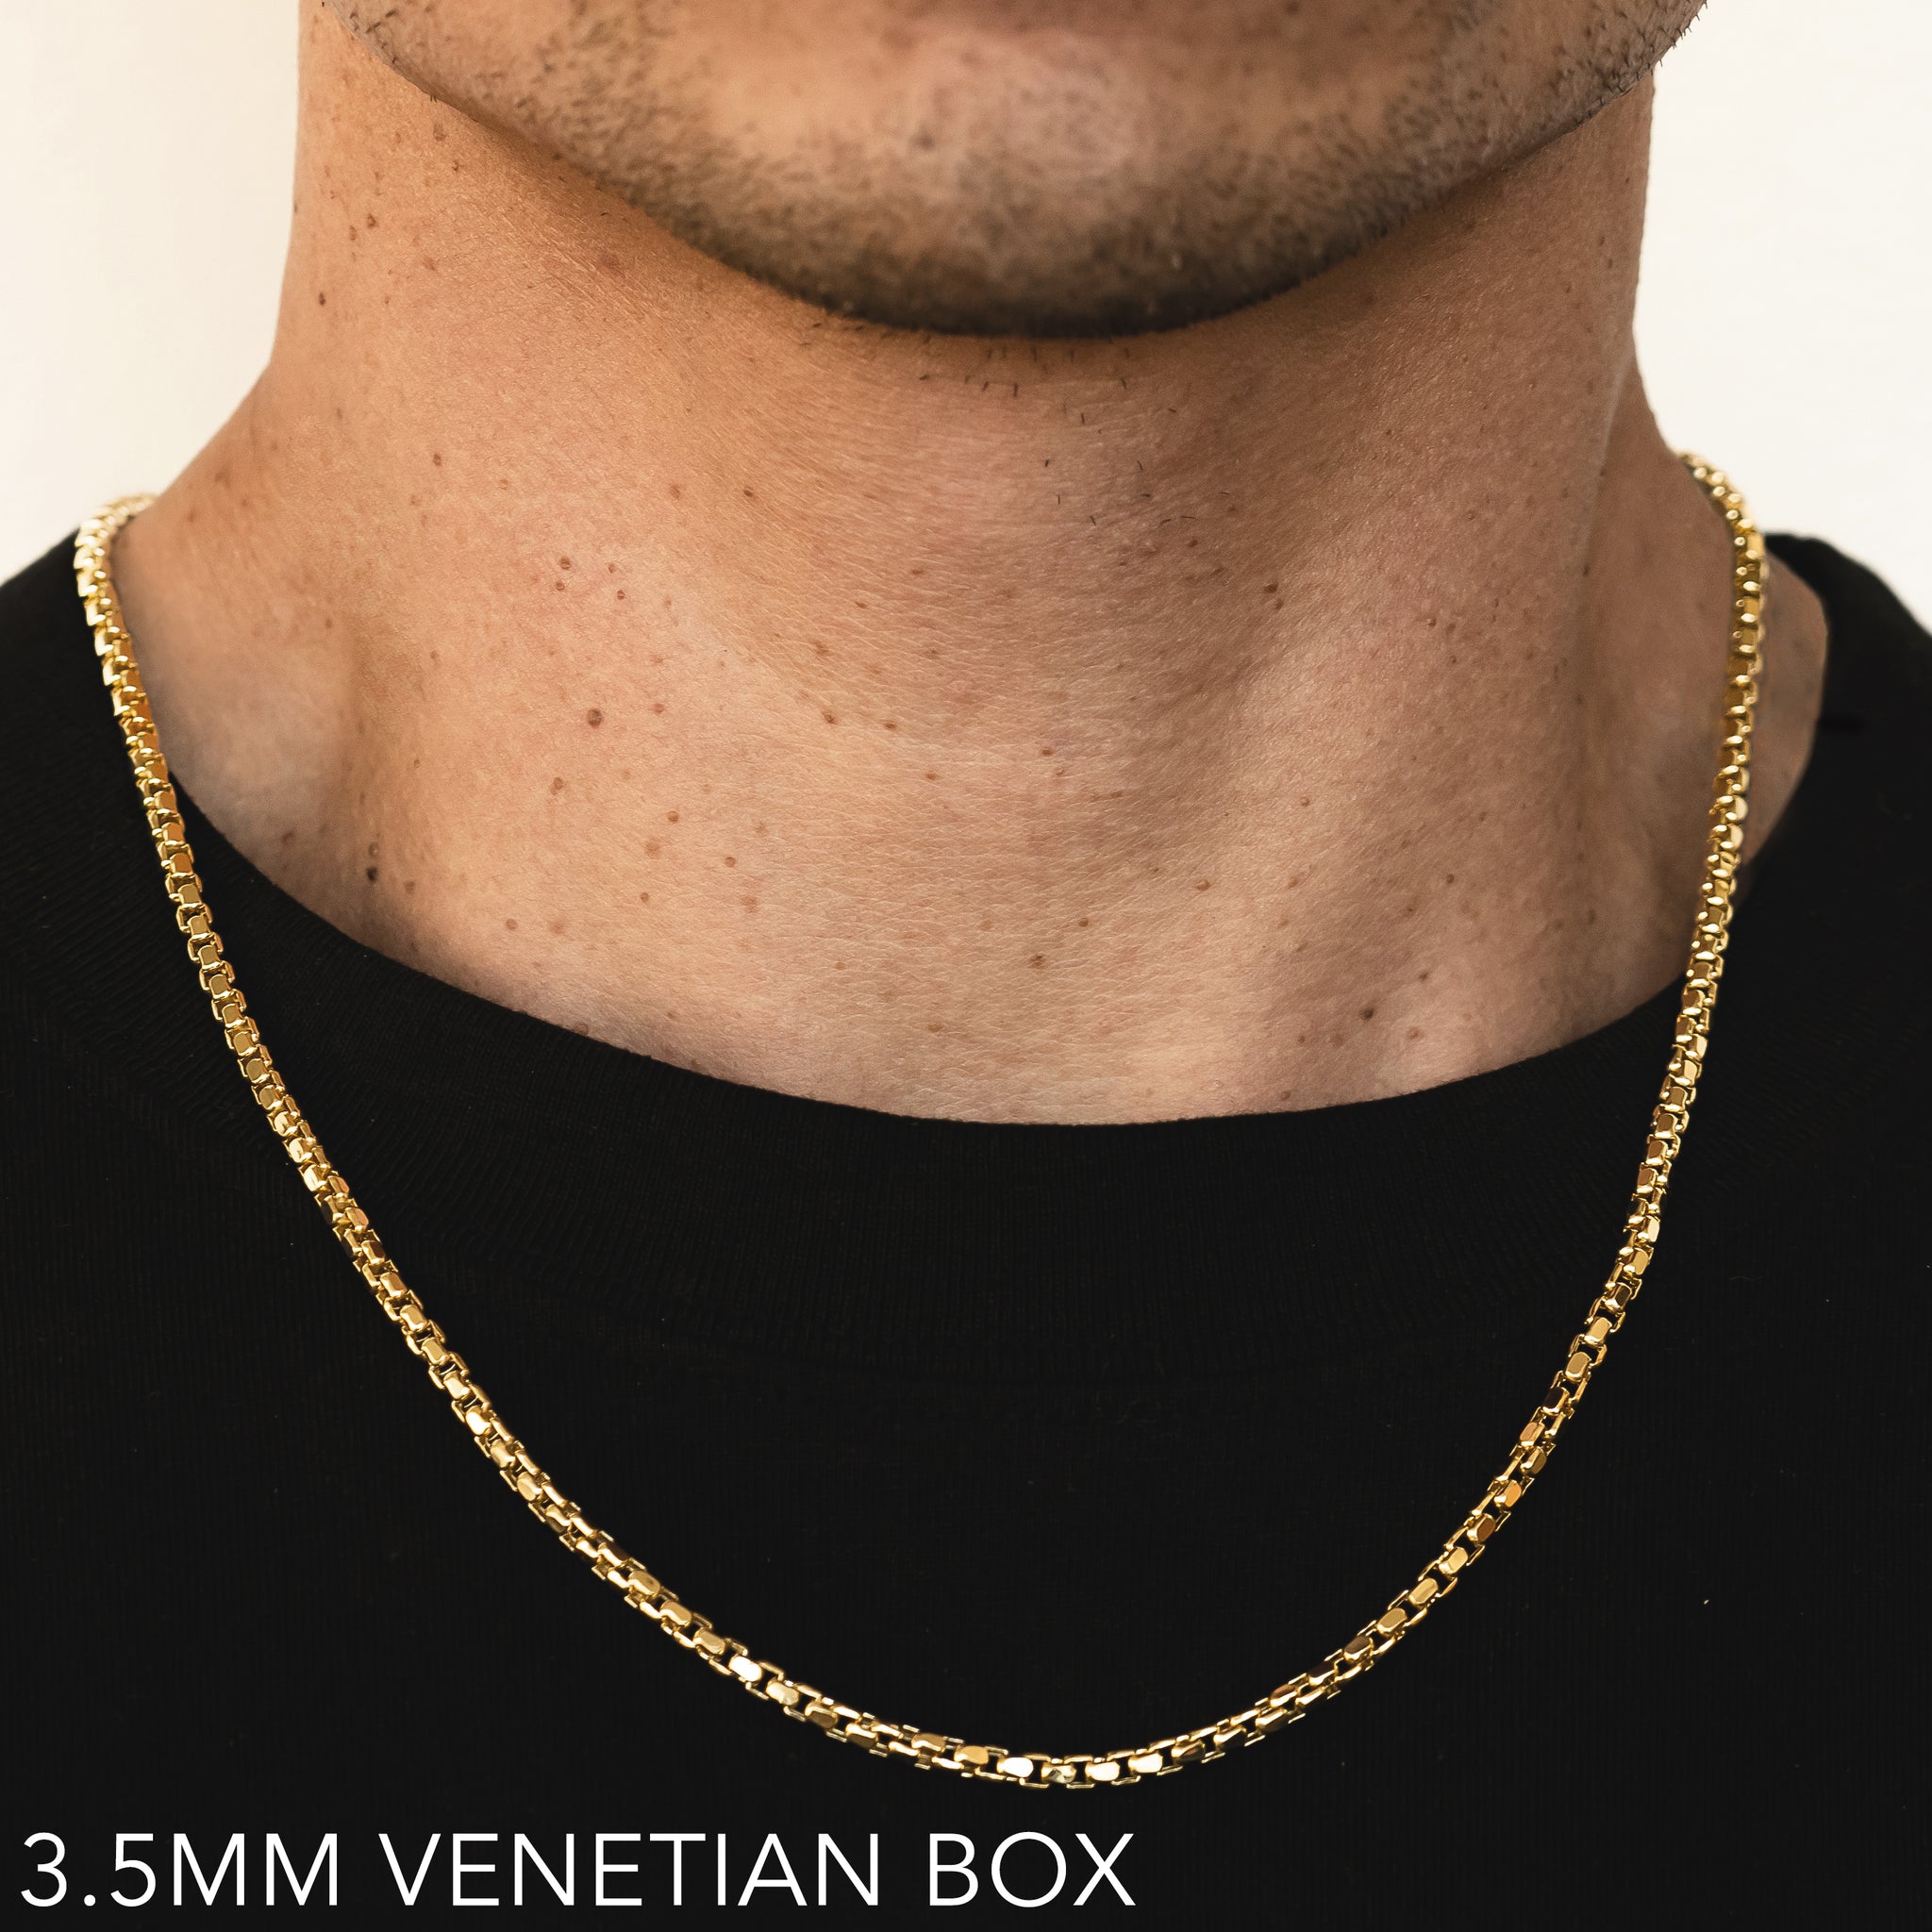 18K 3.5MM YELLOW GOLD SOLID VENETIAN BOX 30" CHAIN NECKLACE (AVAILABLE IN LENGTHS 7" - 30")